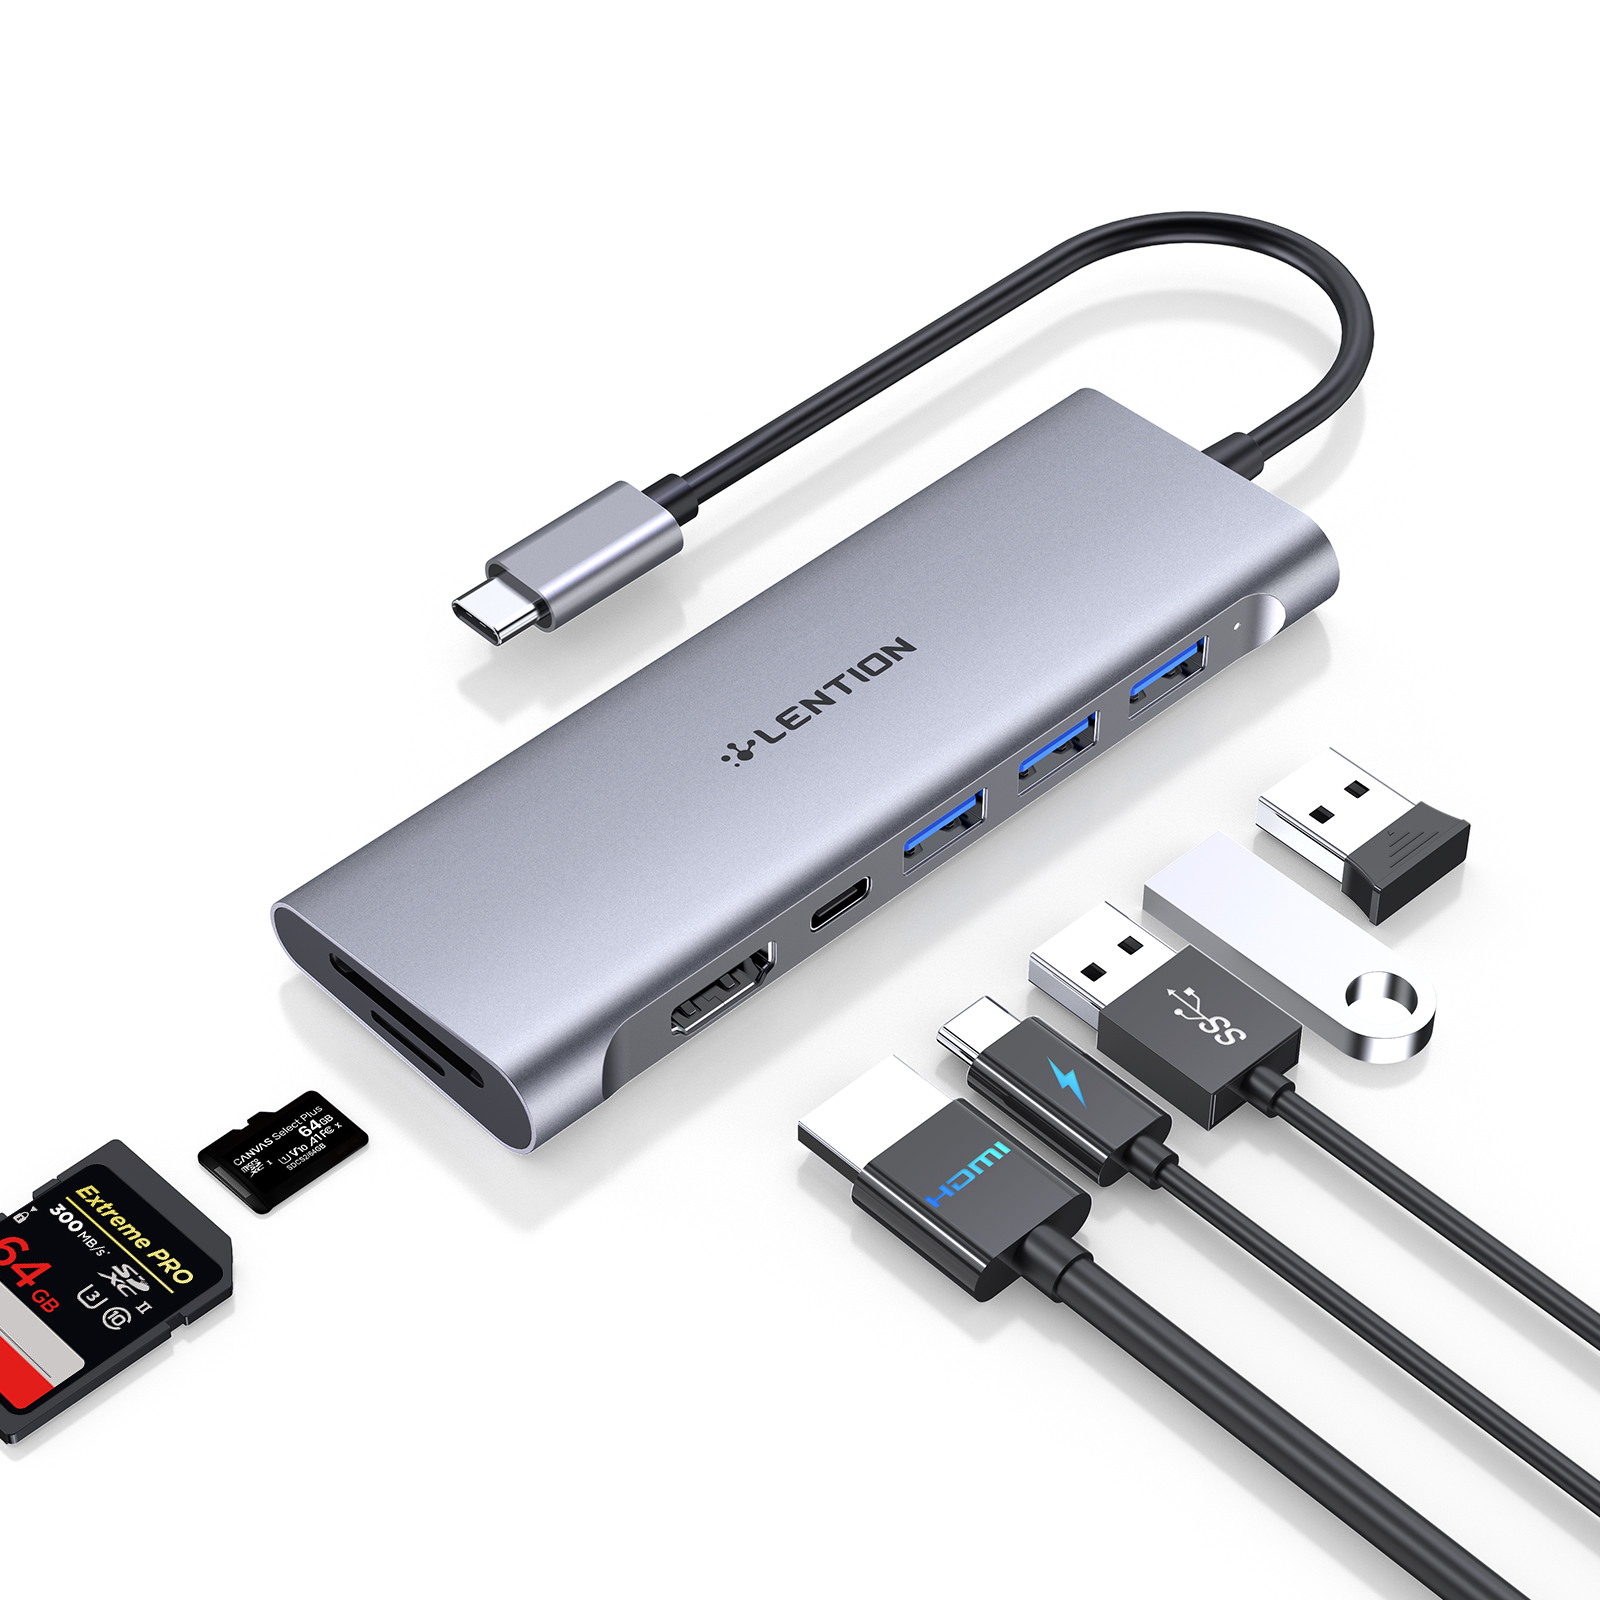 LENTION USB C Multiport Hub with 4K HDMI, 3 USB 3.0, SD/Micro SD Card Reader, 100W PD Compatible 2023-2016 MacBook Pro, New Mac Air, Other Type C Devices, Stable Driver Adapter